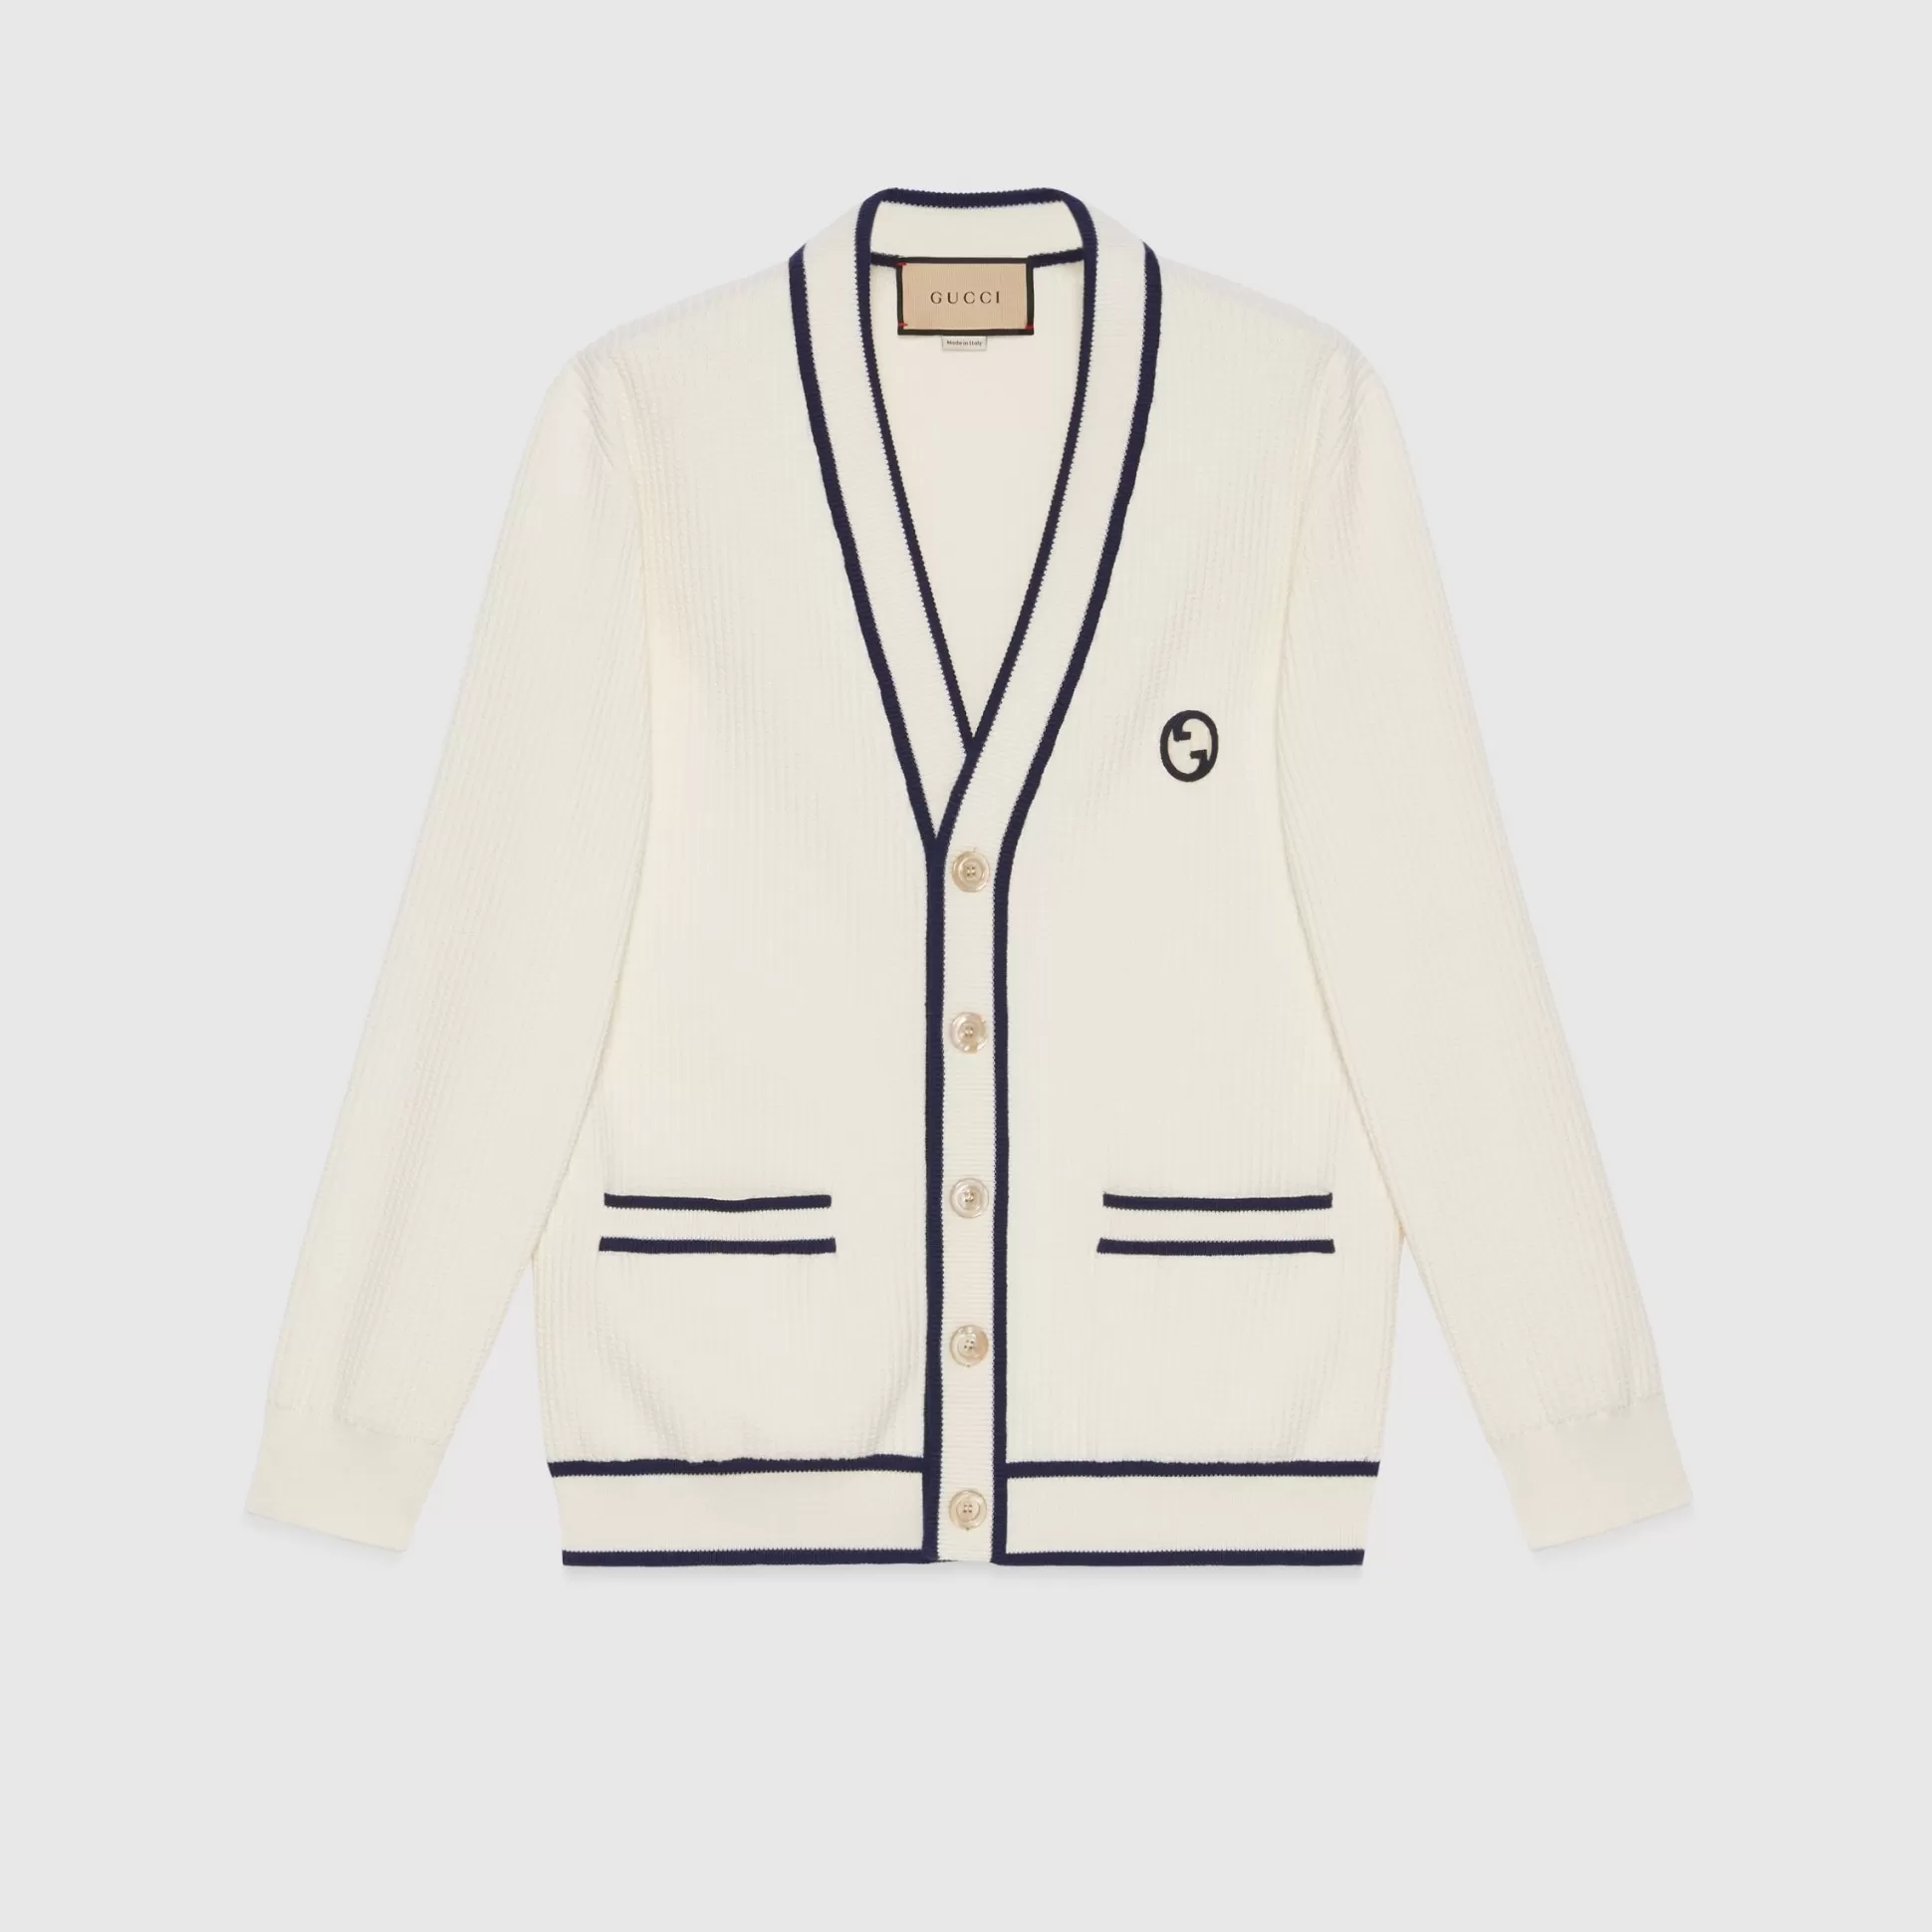 GUCCI Cotton Wool Cardigan With Patch-Men Knitwear